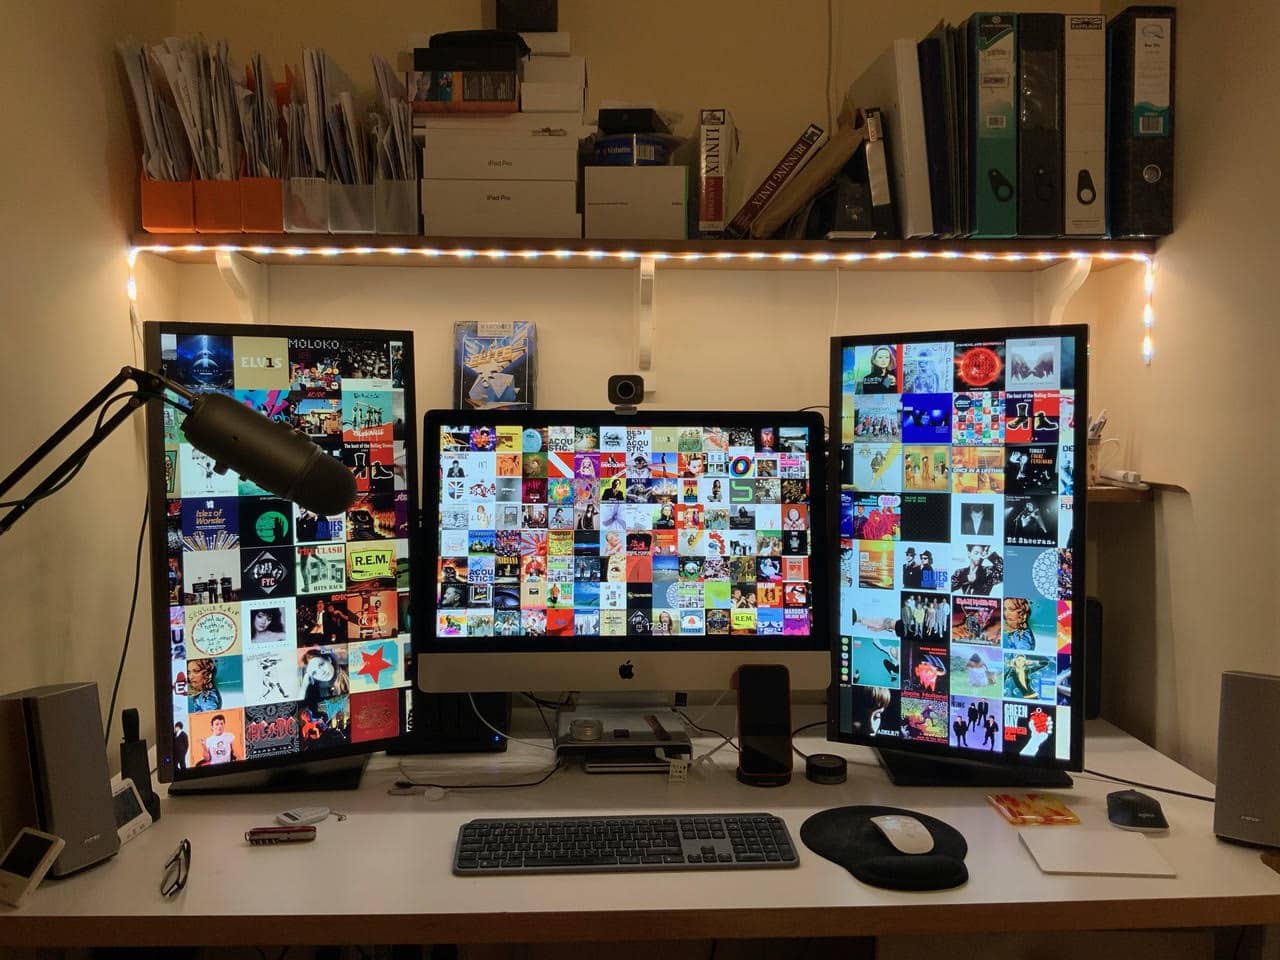 Wilcox's setup centers on a 27-inch 5K iMac with 28-inch Samsung monitors on either side of it.